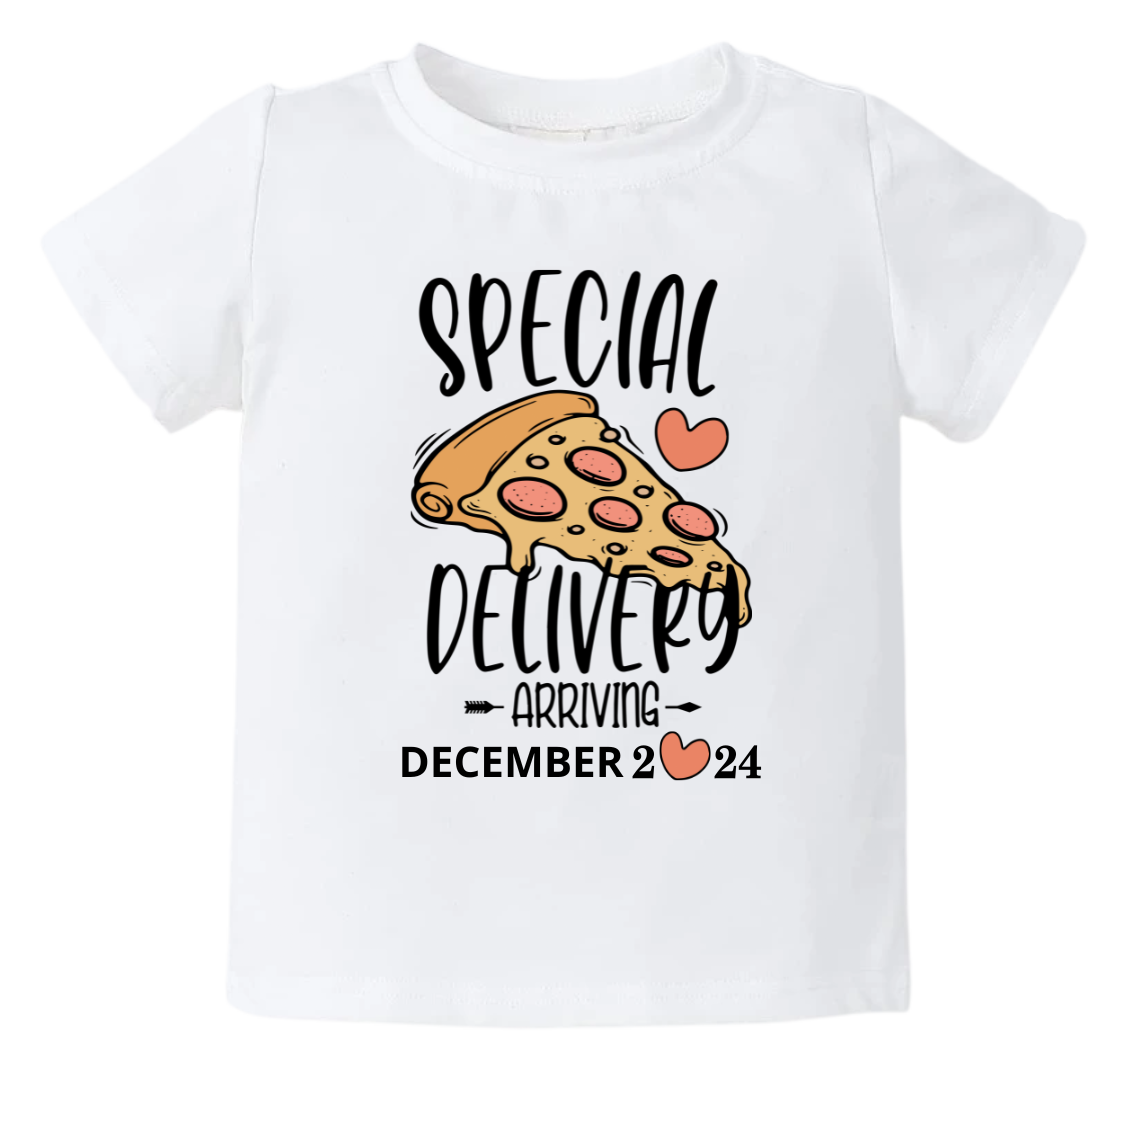 Kid Tshirt with pizza design and customizable 'Special Delivery' text for Baby Arrival dates.